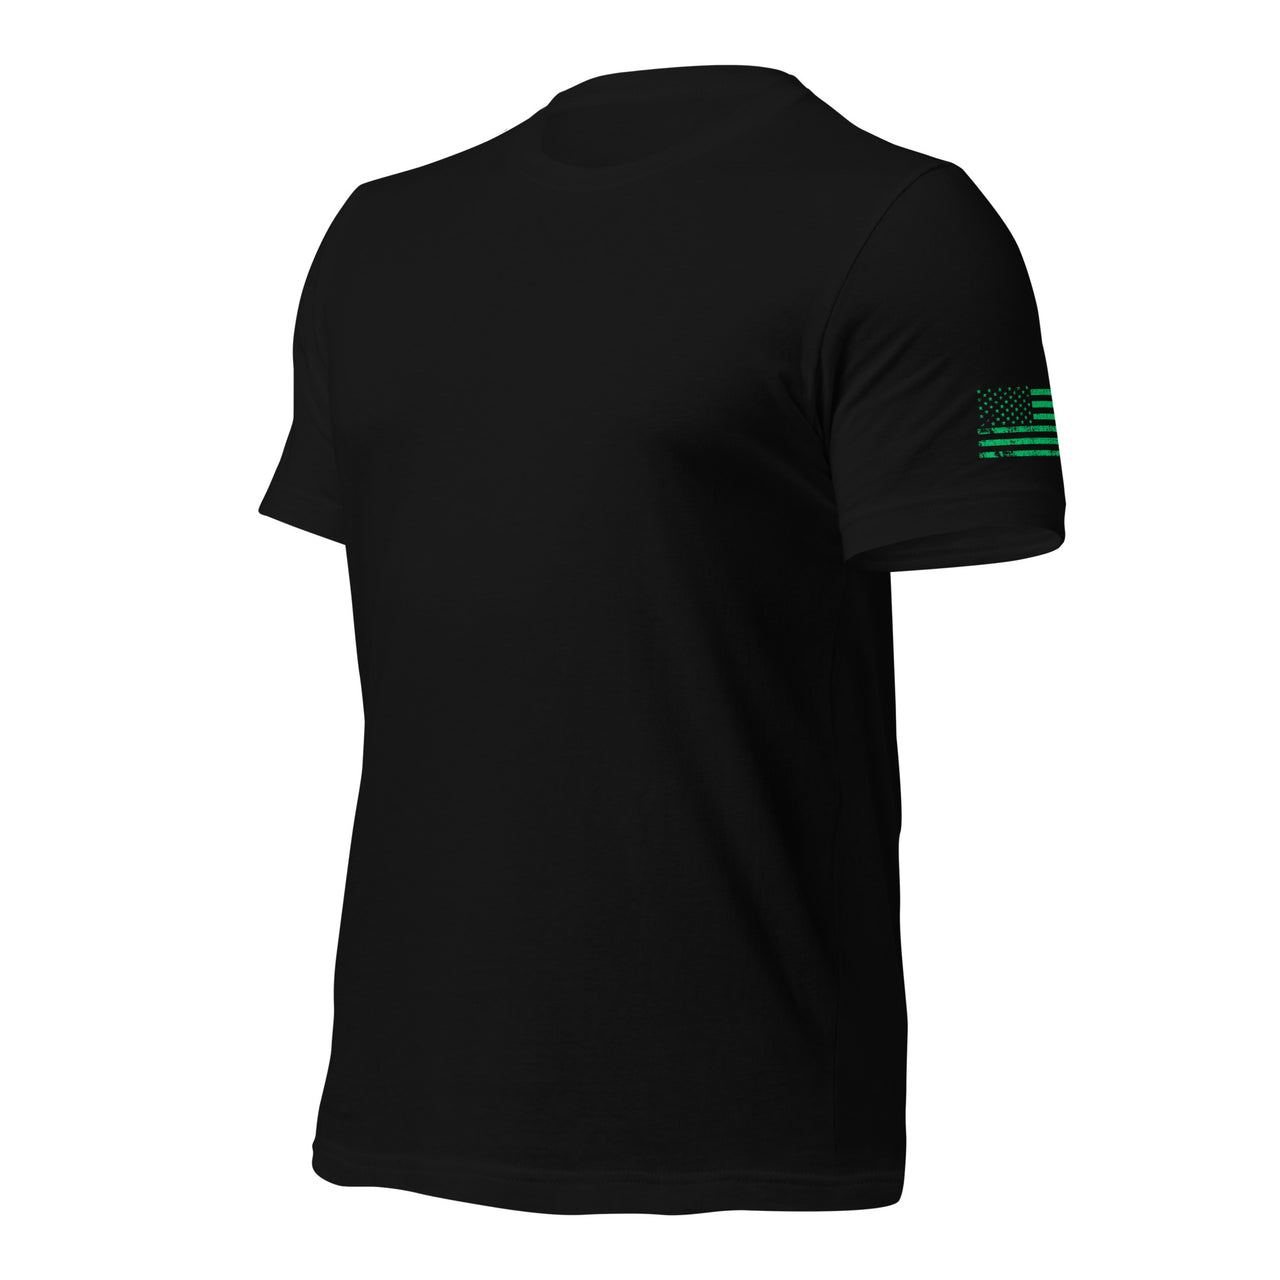 Celtic Cross T-Shirt With 4 Leaf Clover And American Flag in black front side view